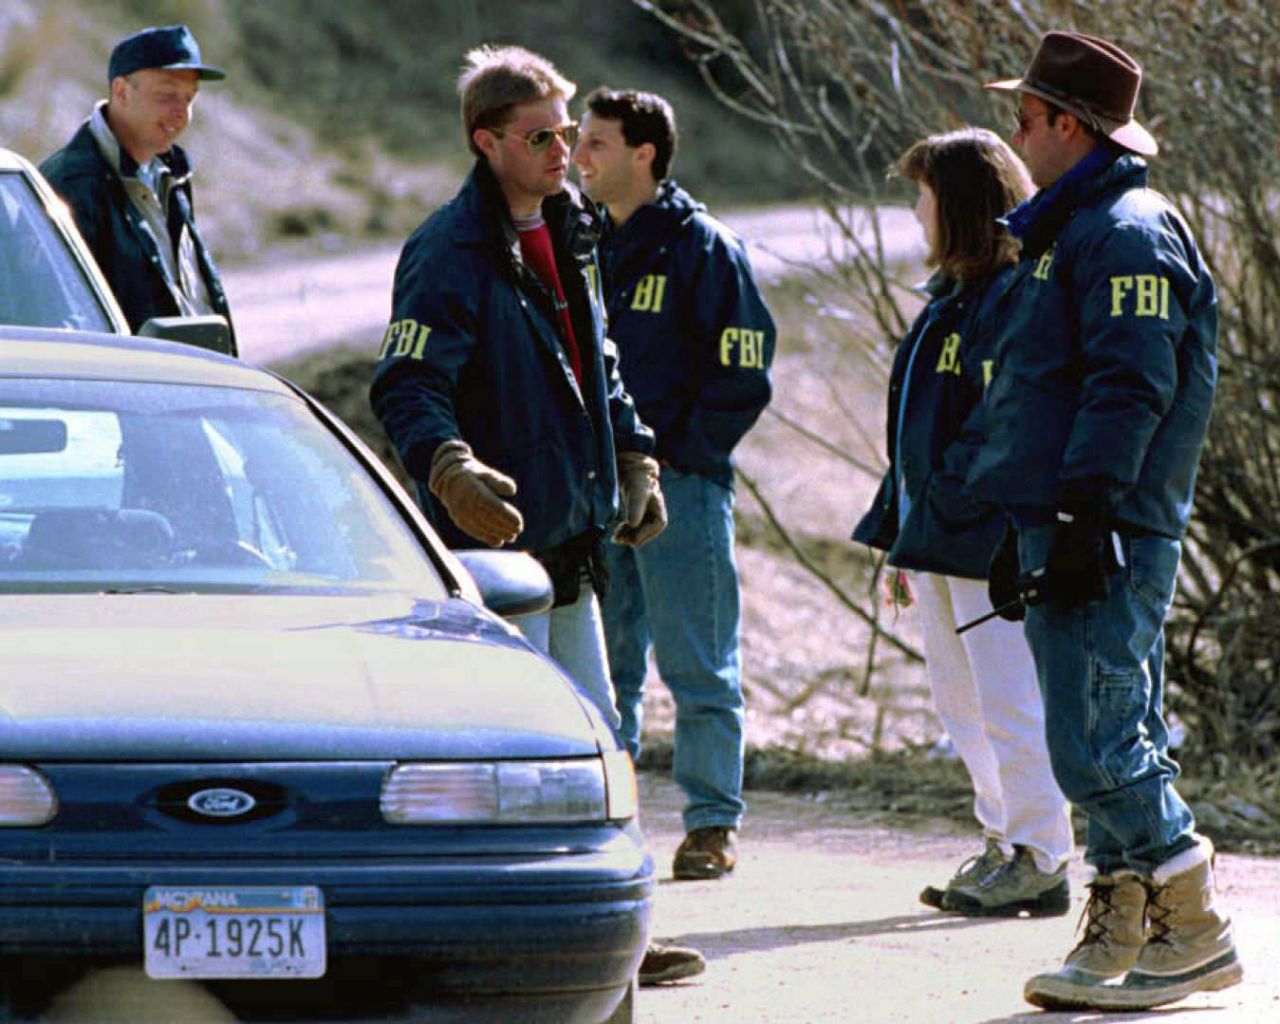 Three people were killed and 23 others were wounded after a string of mail bombings carried out by Ted Kaczynski, aka "The Unabomber," from 1978 to 1995. Here, FBI agents guard the entrance to Kaczynski's property in Lincoln, Montana, on April 5, 1996. In May 1998, Kaczynski received eight life sentences for his crimes.